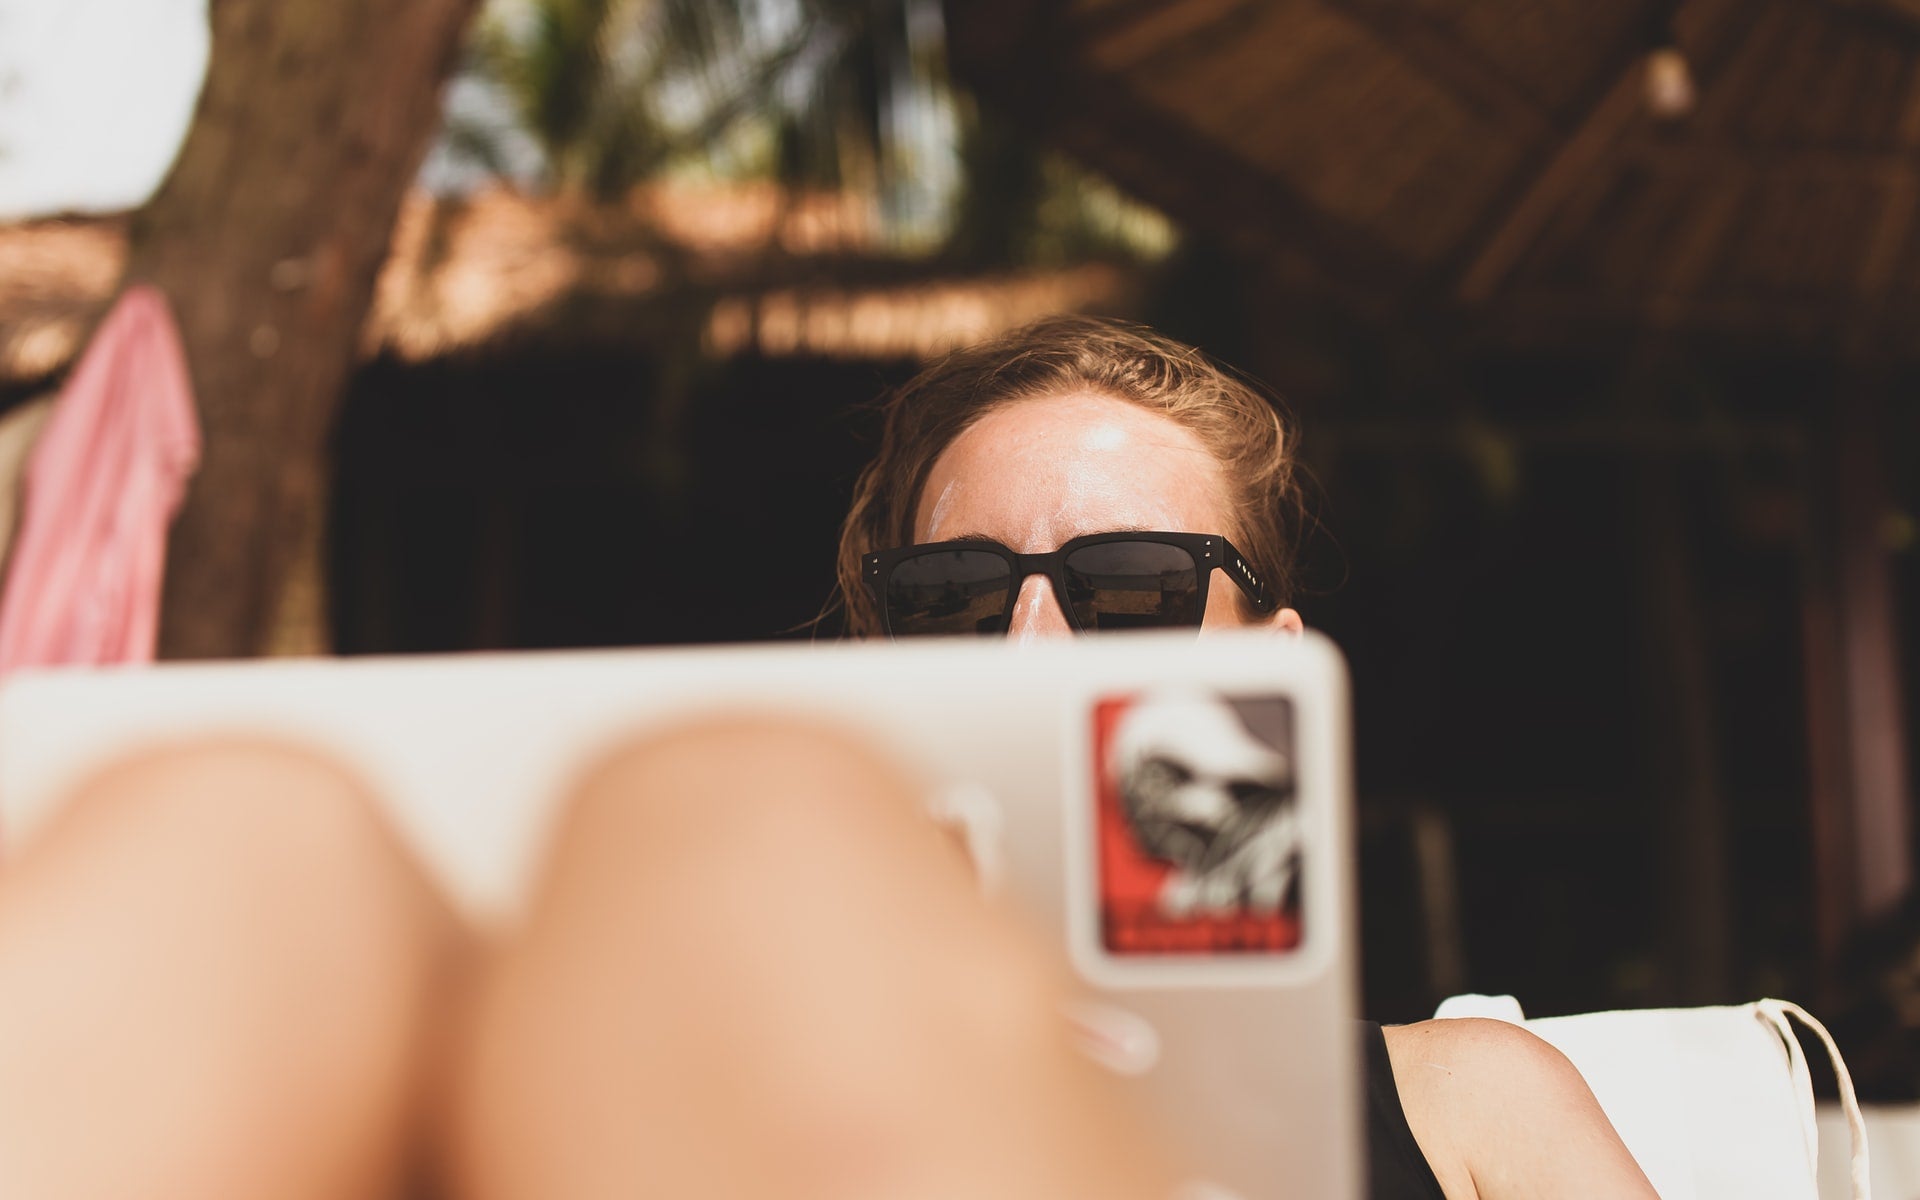 Why Find a Job as a Digital Nomad? | Nomad Internet